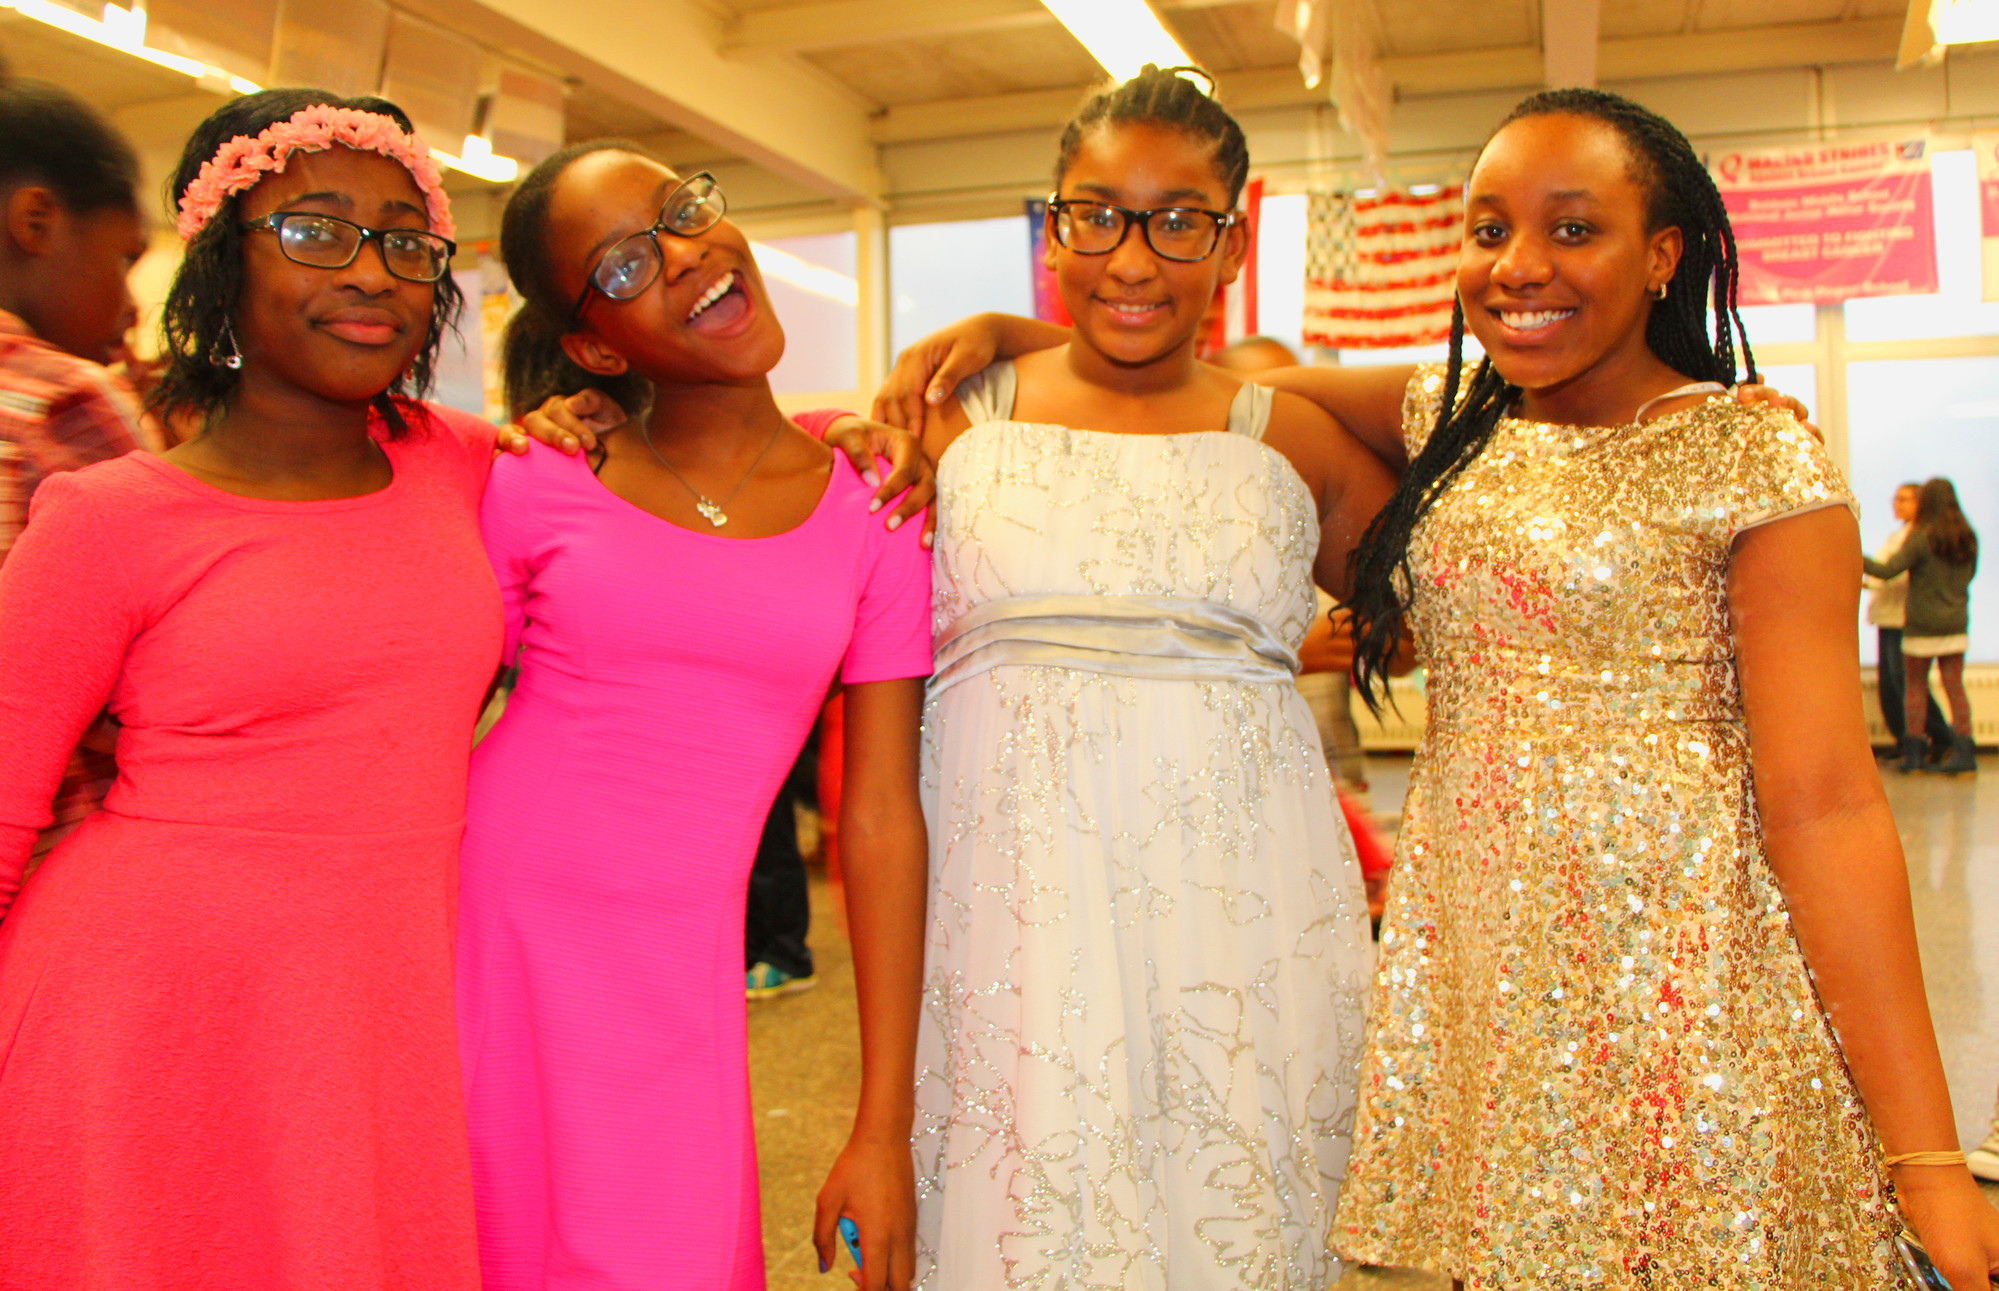 Girls and boys dressed up for the dance, including, from left, Terae Richardson, 11, Felicia Warrington, 11, Mahlasia Simmons, 11, and Aishat Shittu, 11.